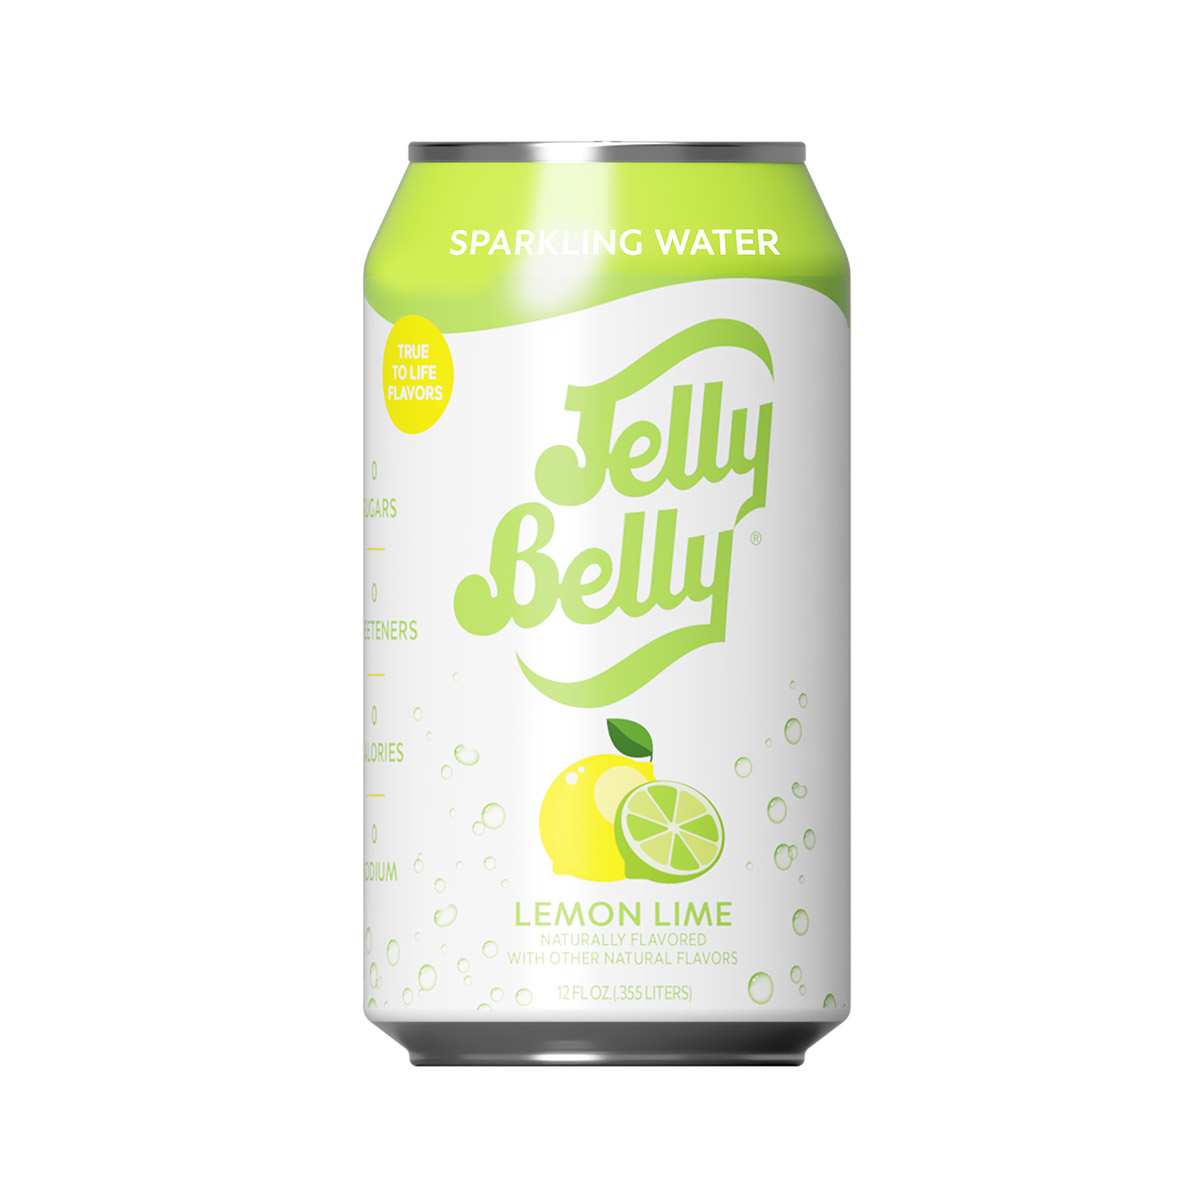 lemon lime jelly belly sparkling water